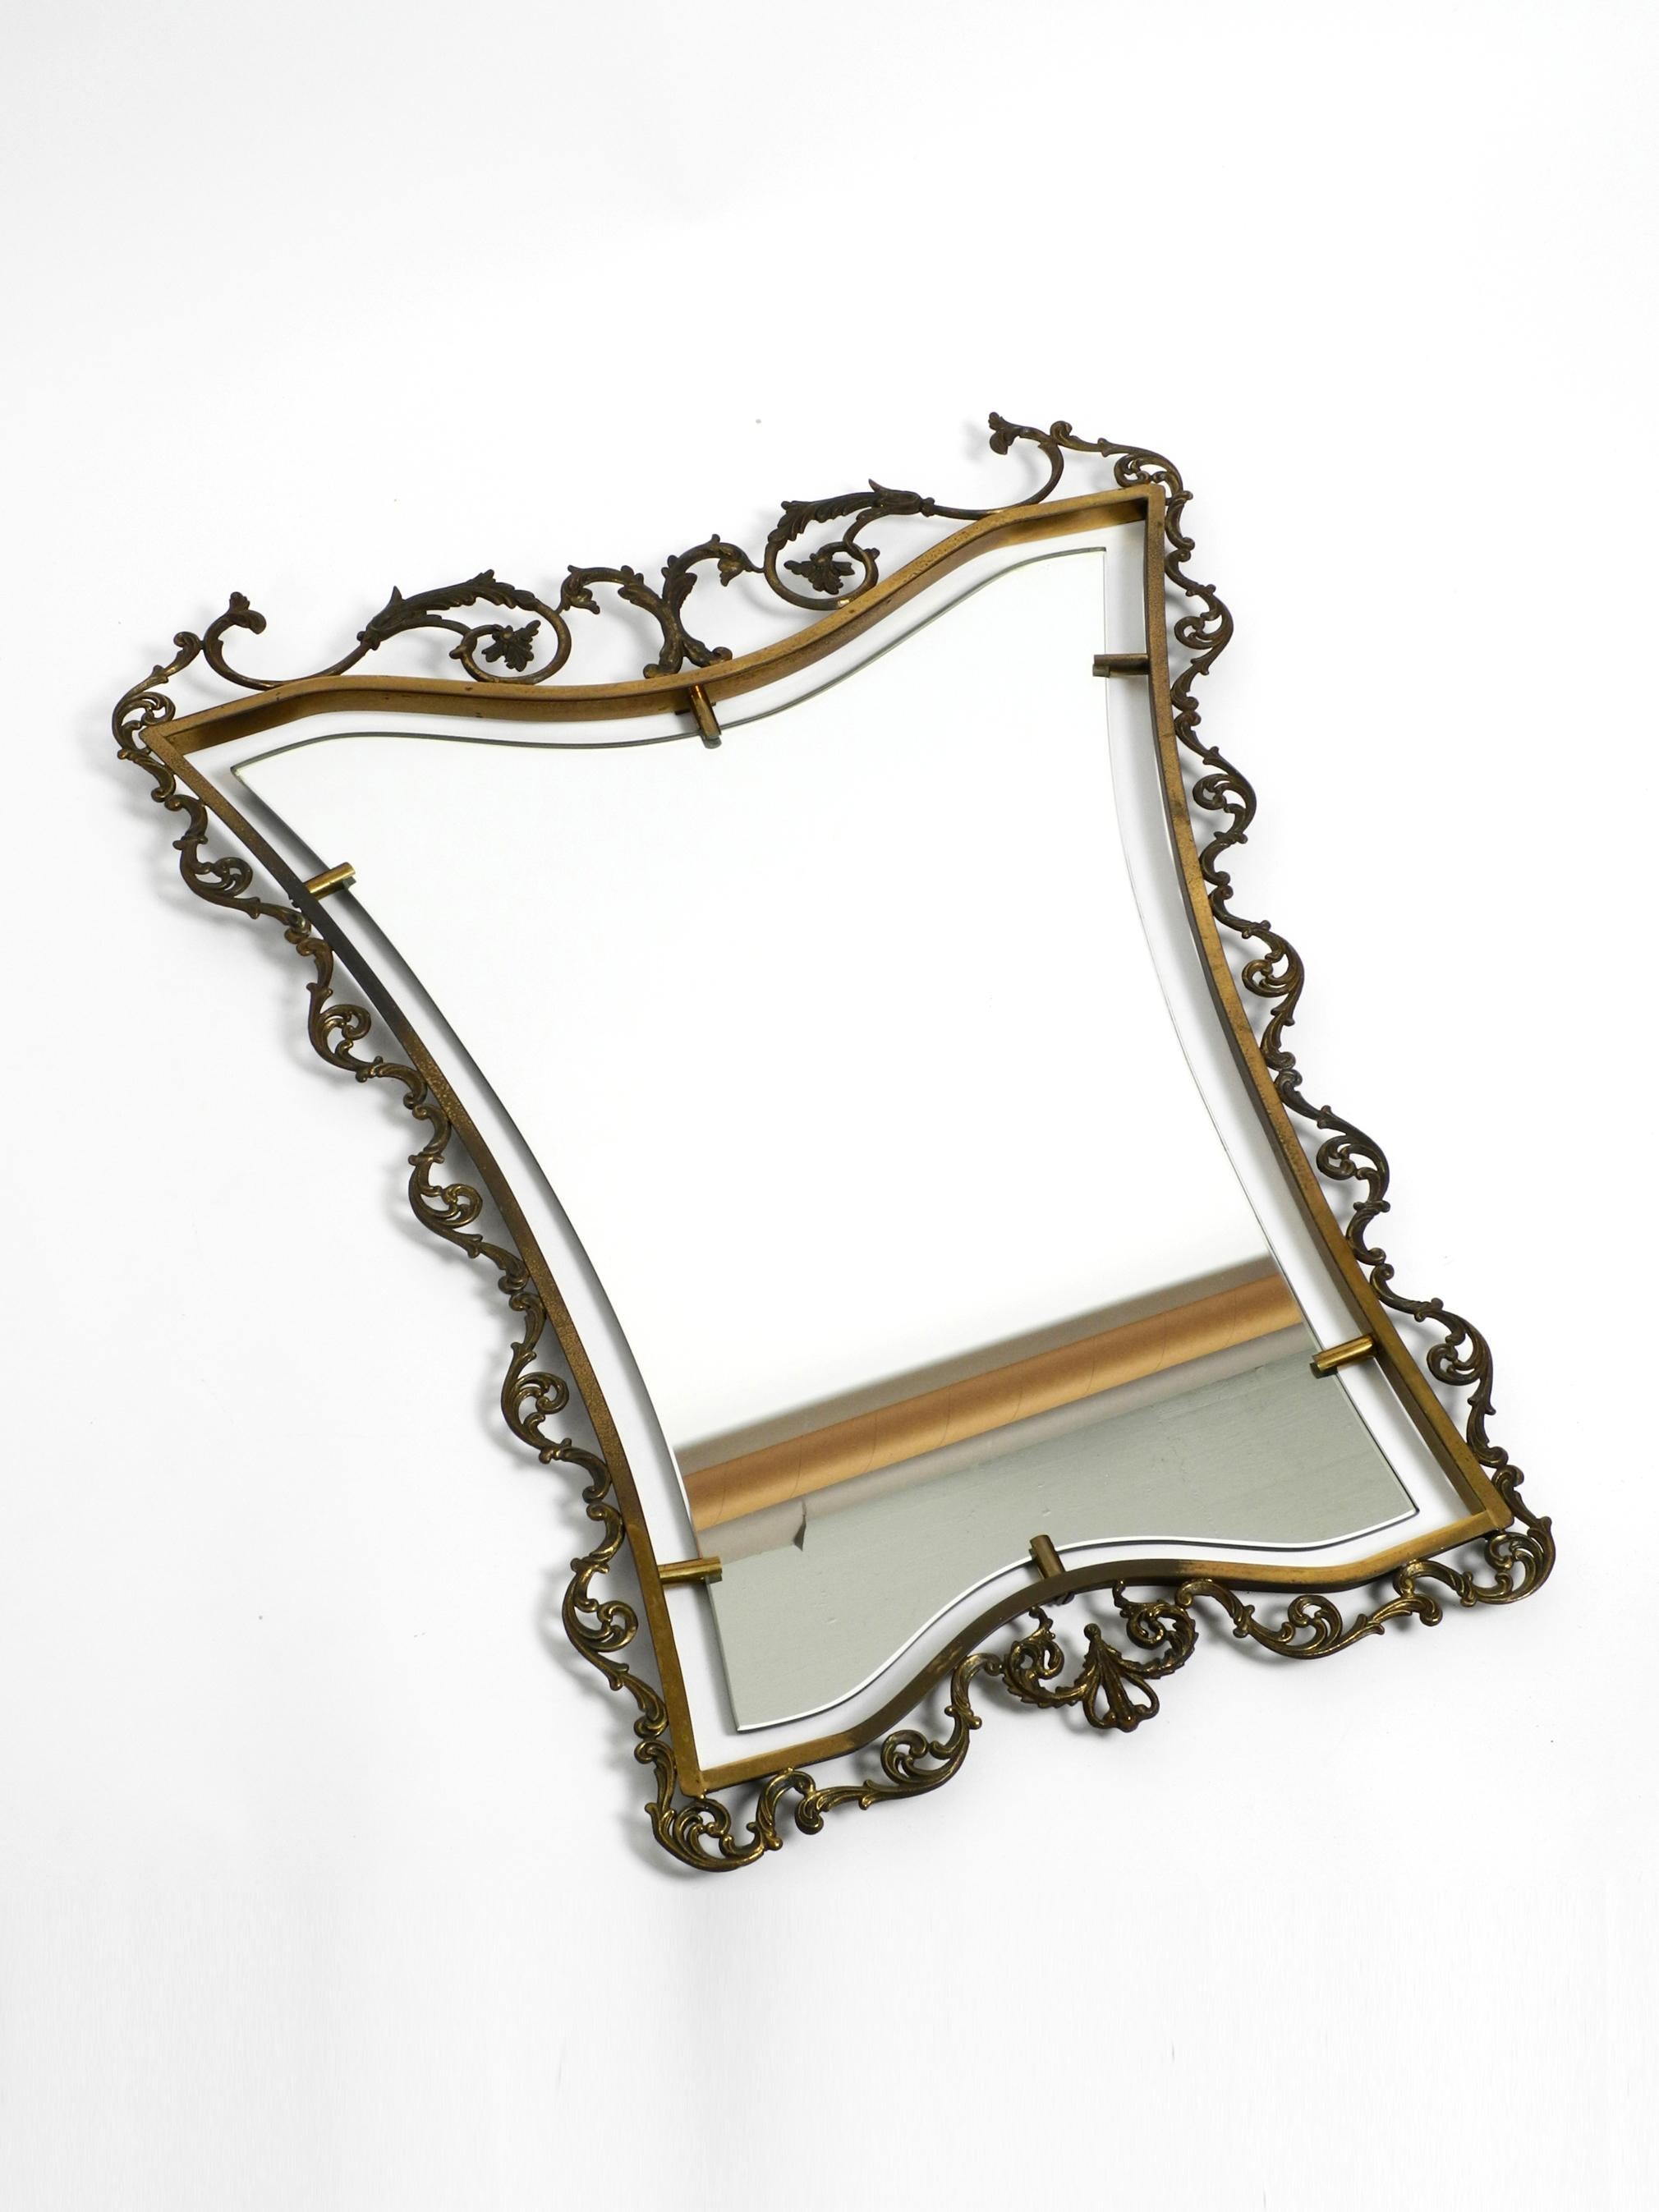 Extraordinary Large, Heavy Italian Mid Century Wall Mirror with an Ornate Brass For Sale 14